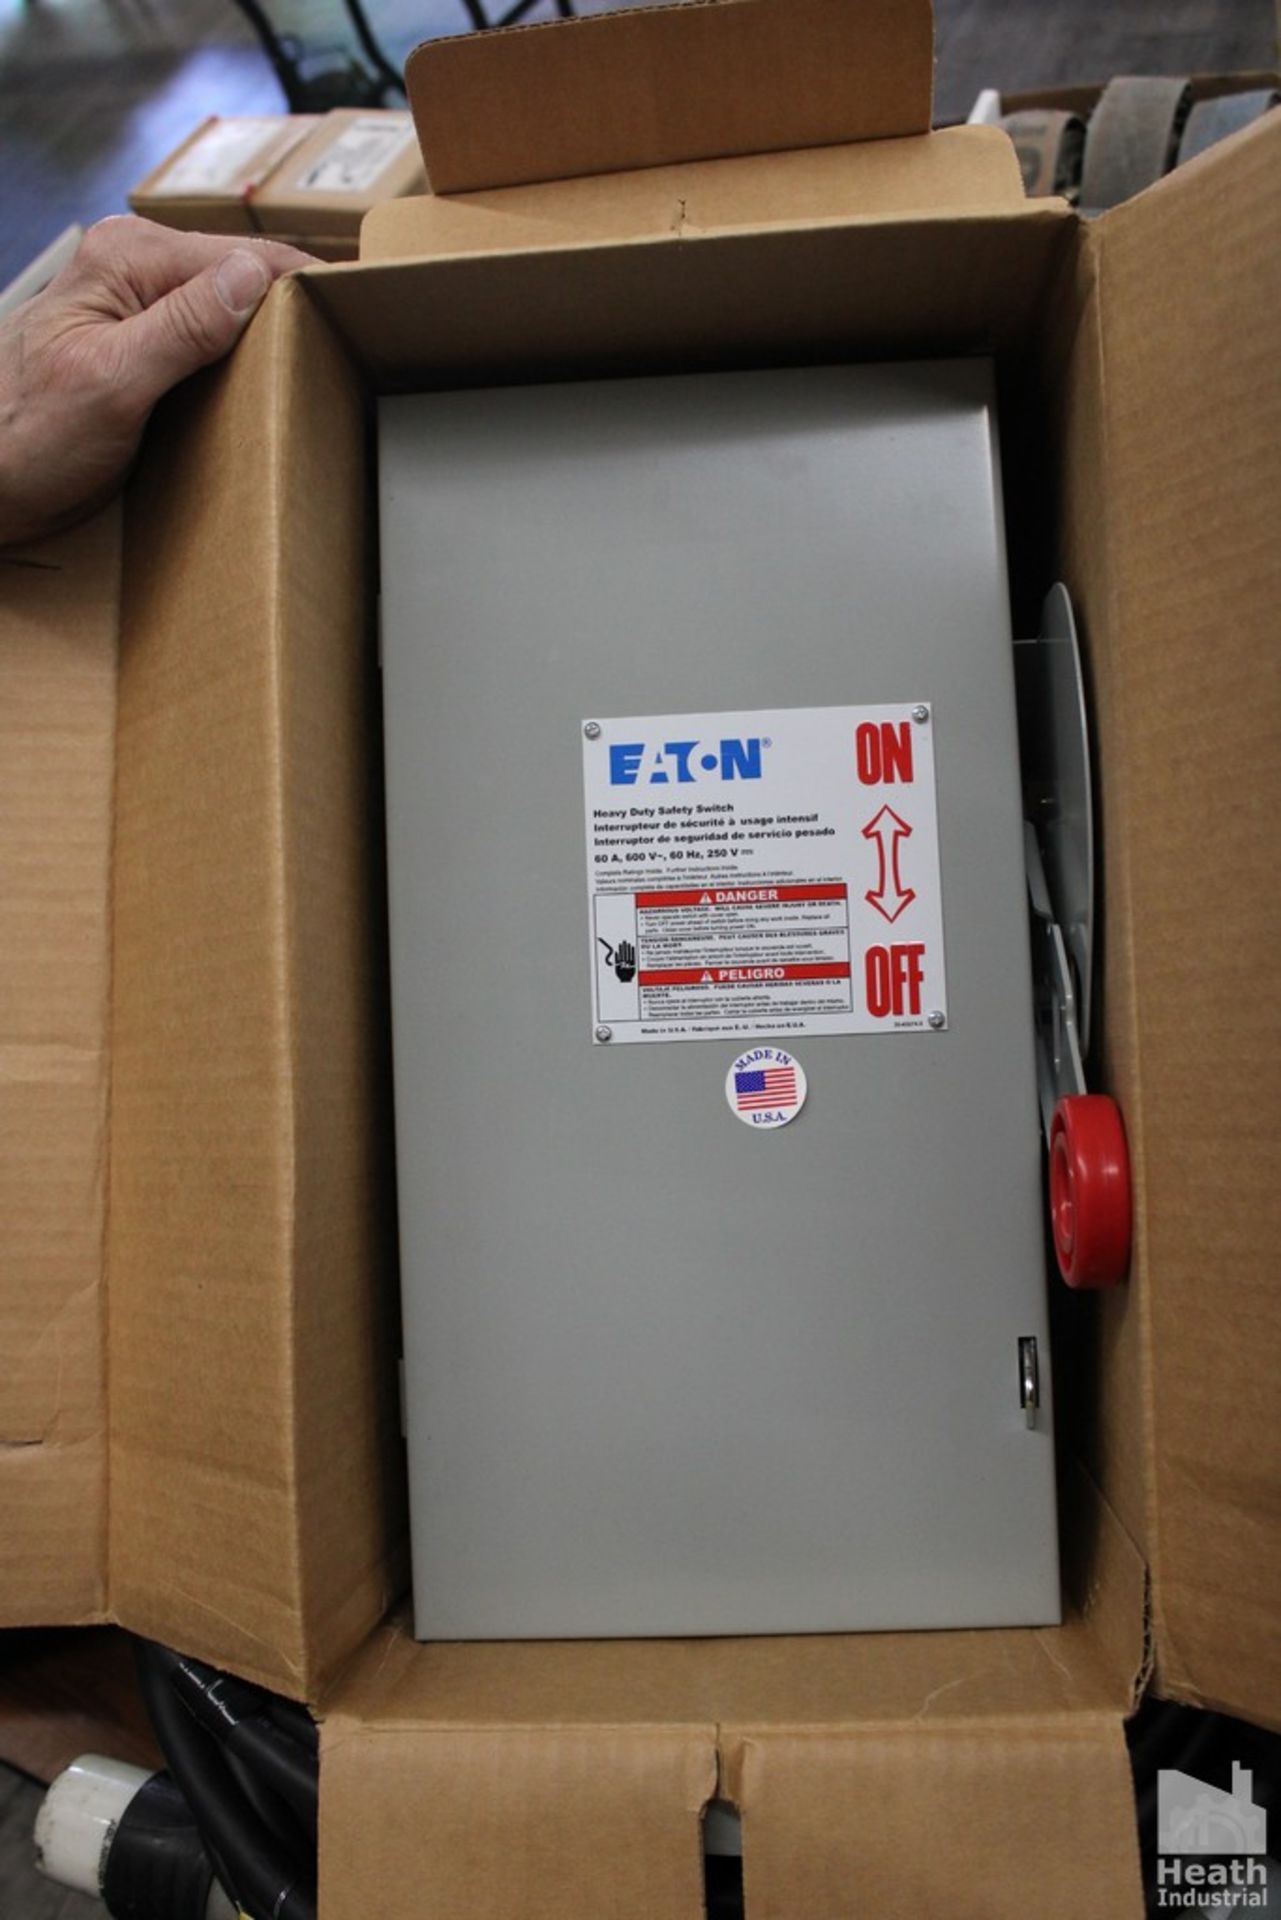 EATON 60AMP HEAVY DUTY SAFETY SWITCH, MODEL DH362FGK, NEW IN BOX - Image 2 of 3